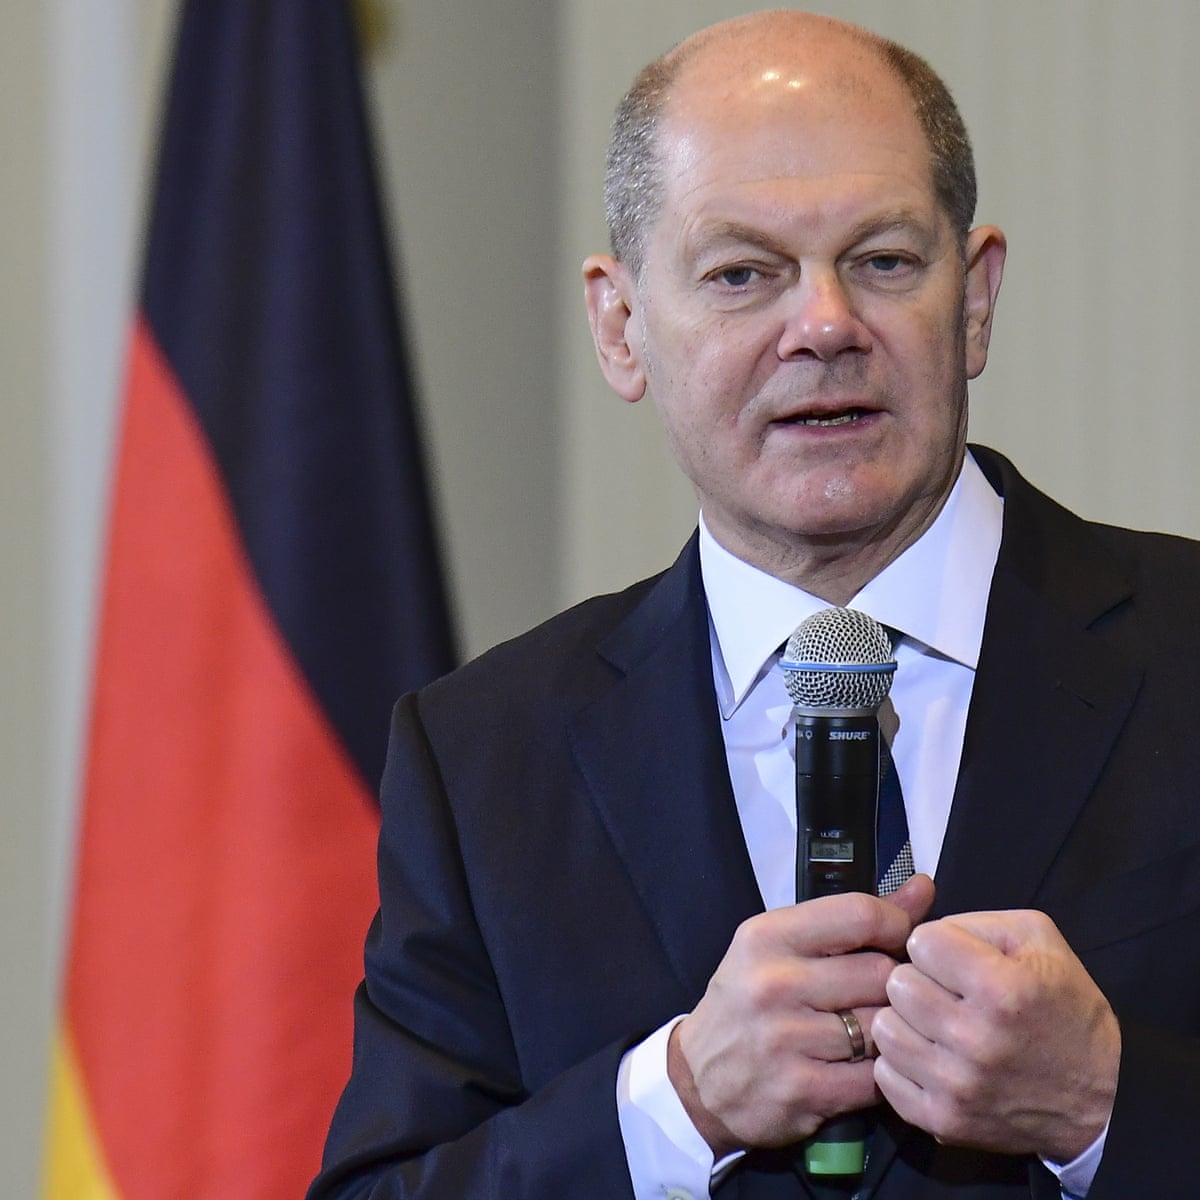 Scholz-o-matic: German chancellor's old habits find new audience | Germany | The Guardian